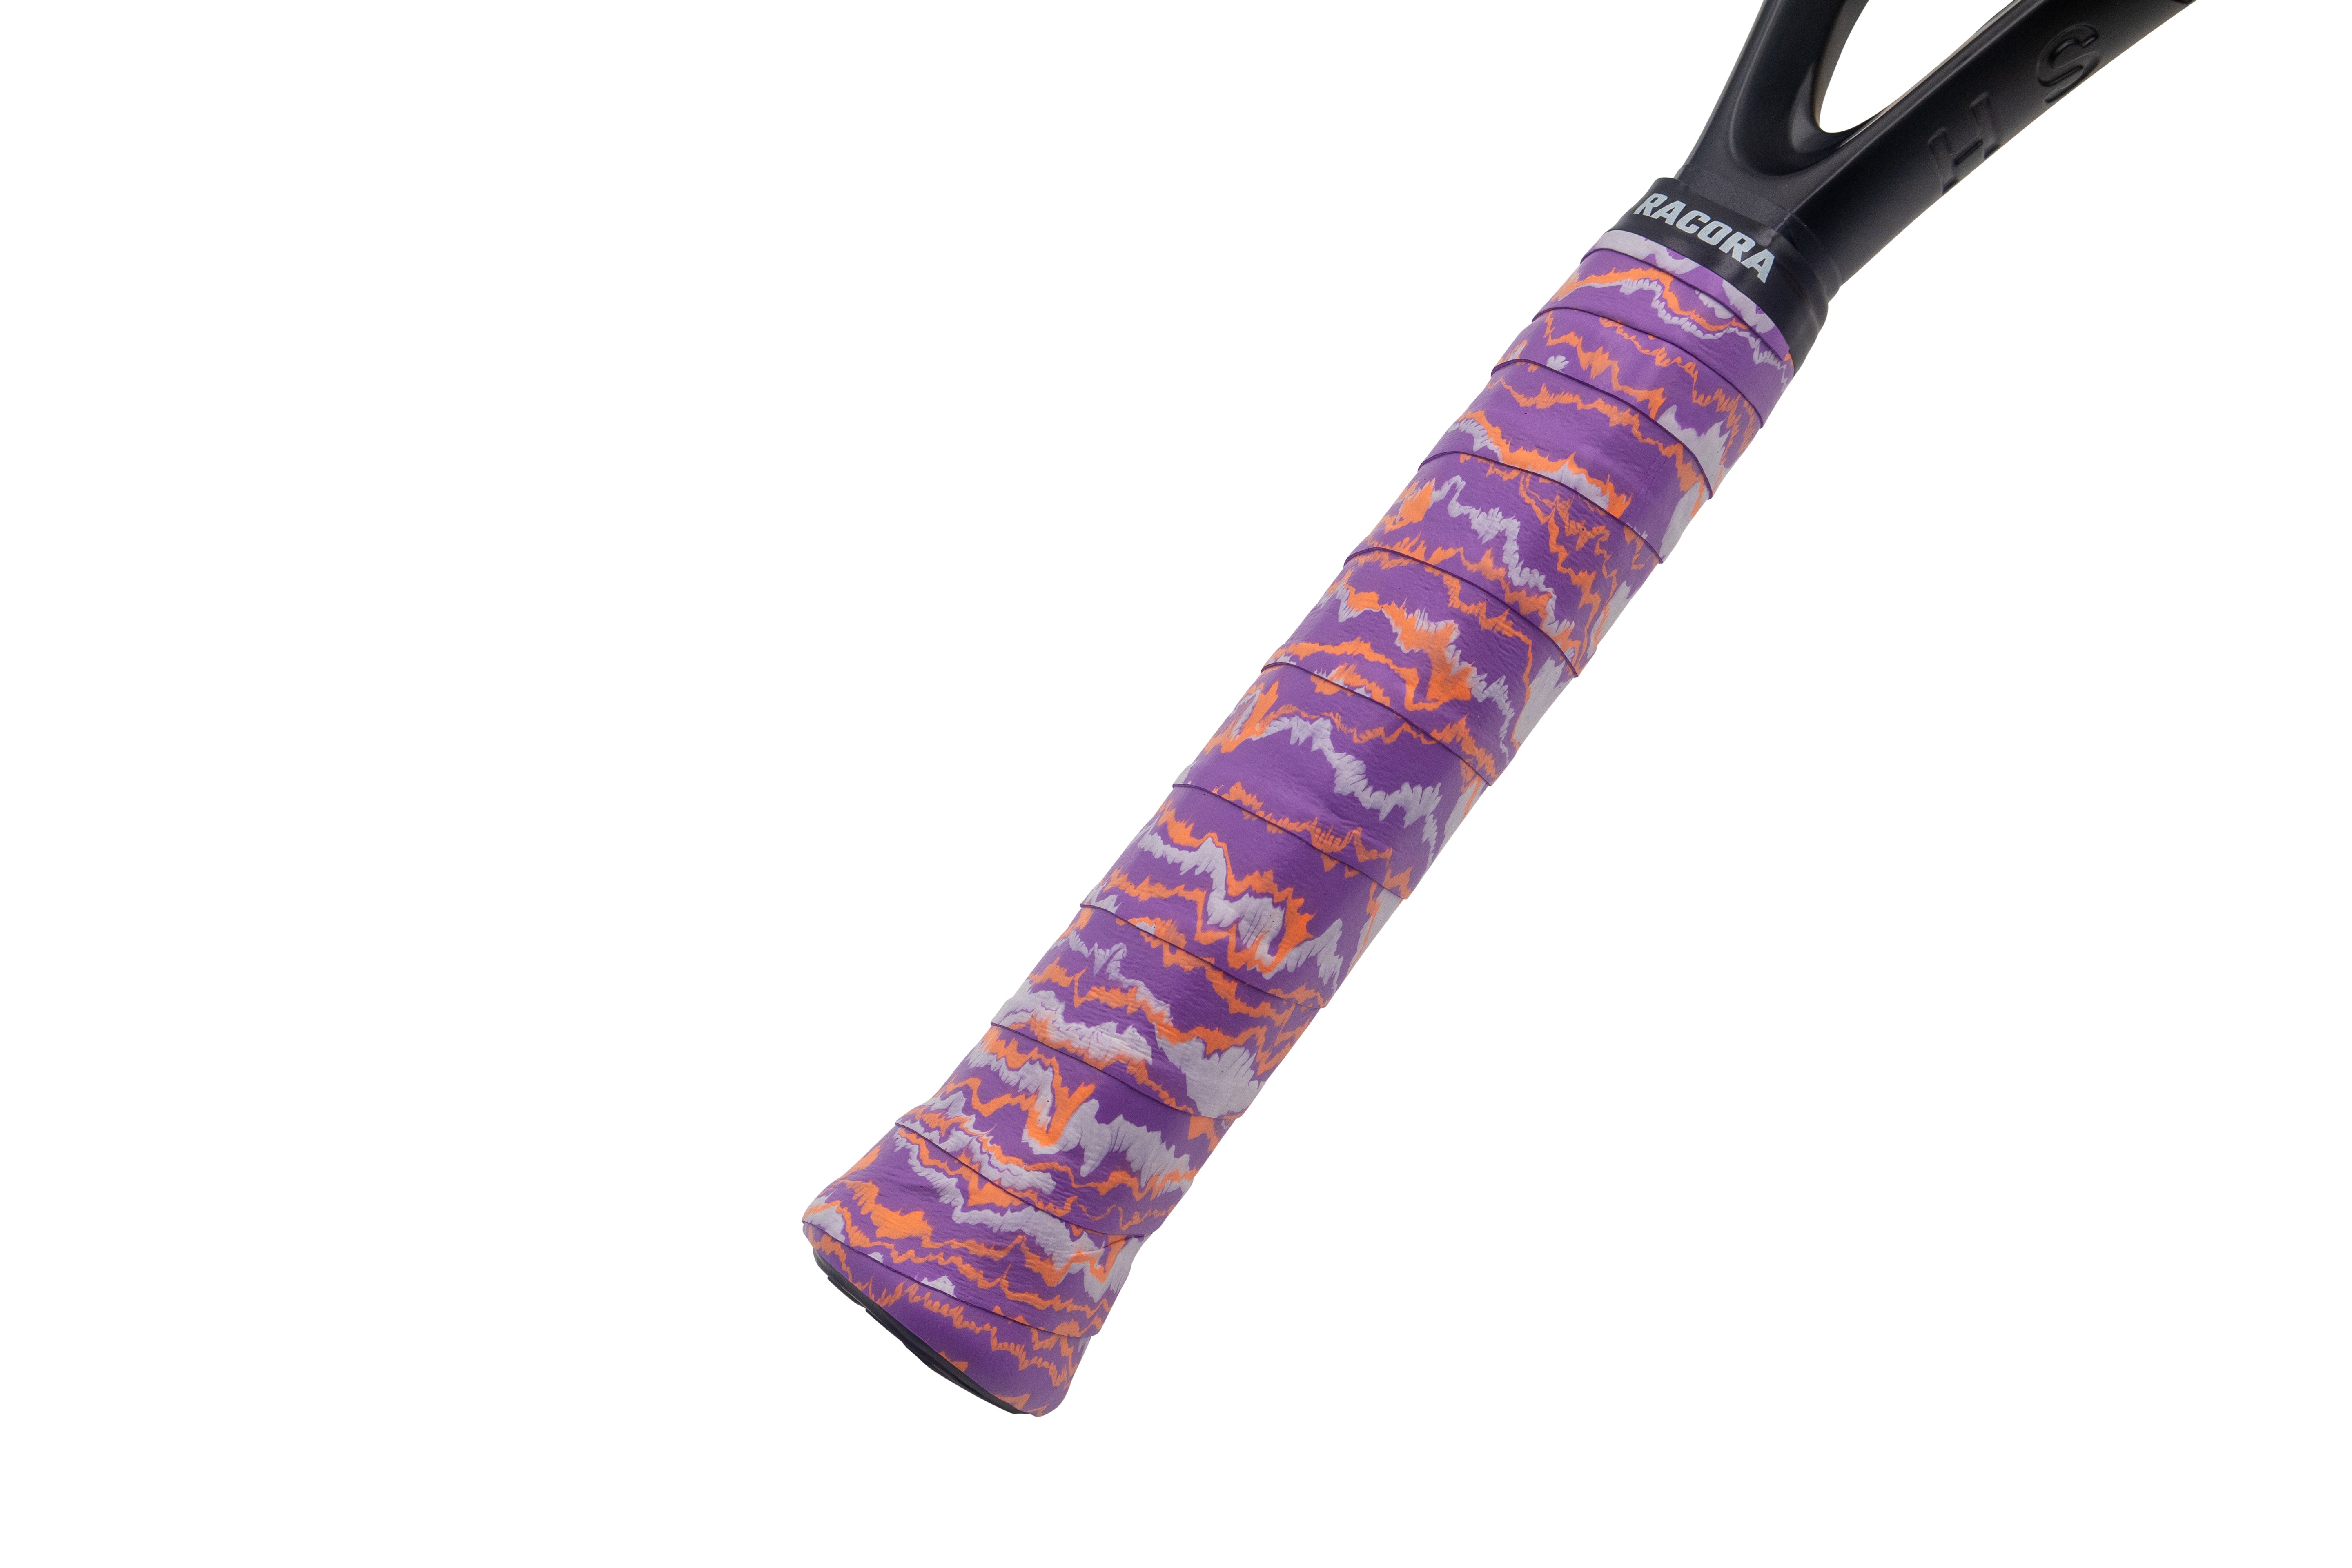 Purple wave tennis overgrip on tennis racket, held at an angle